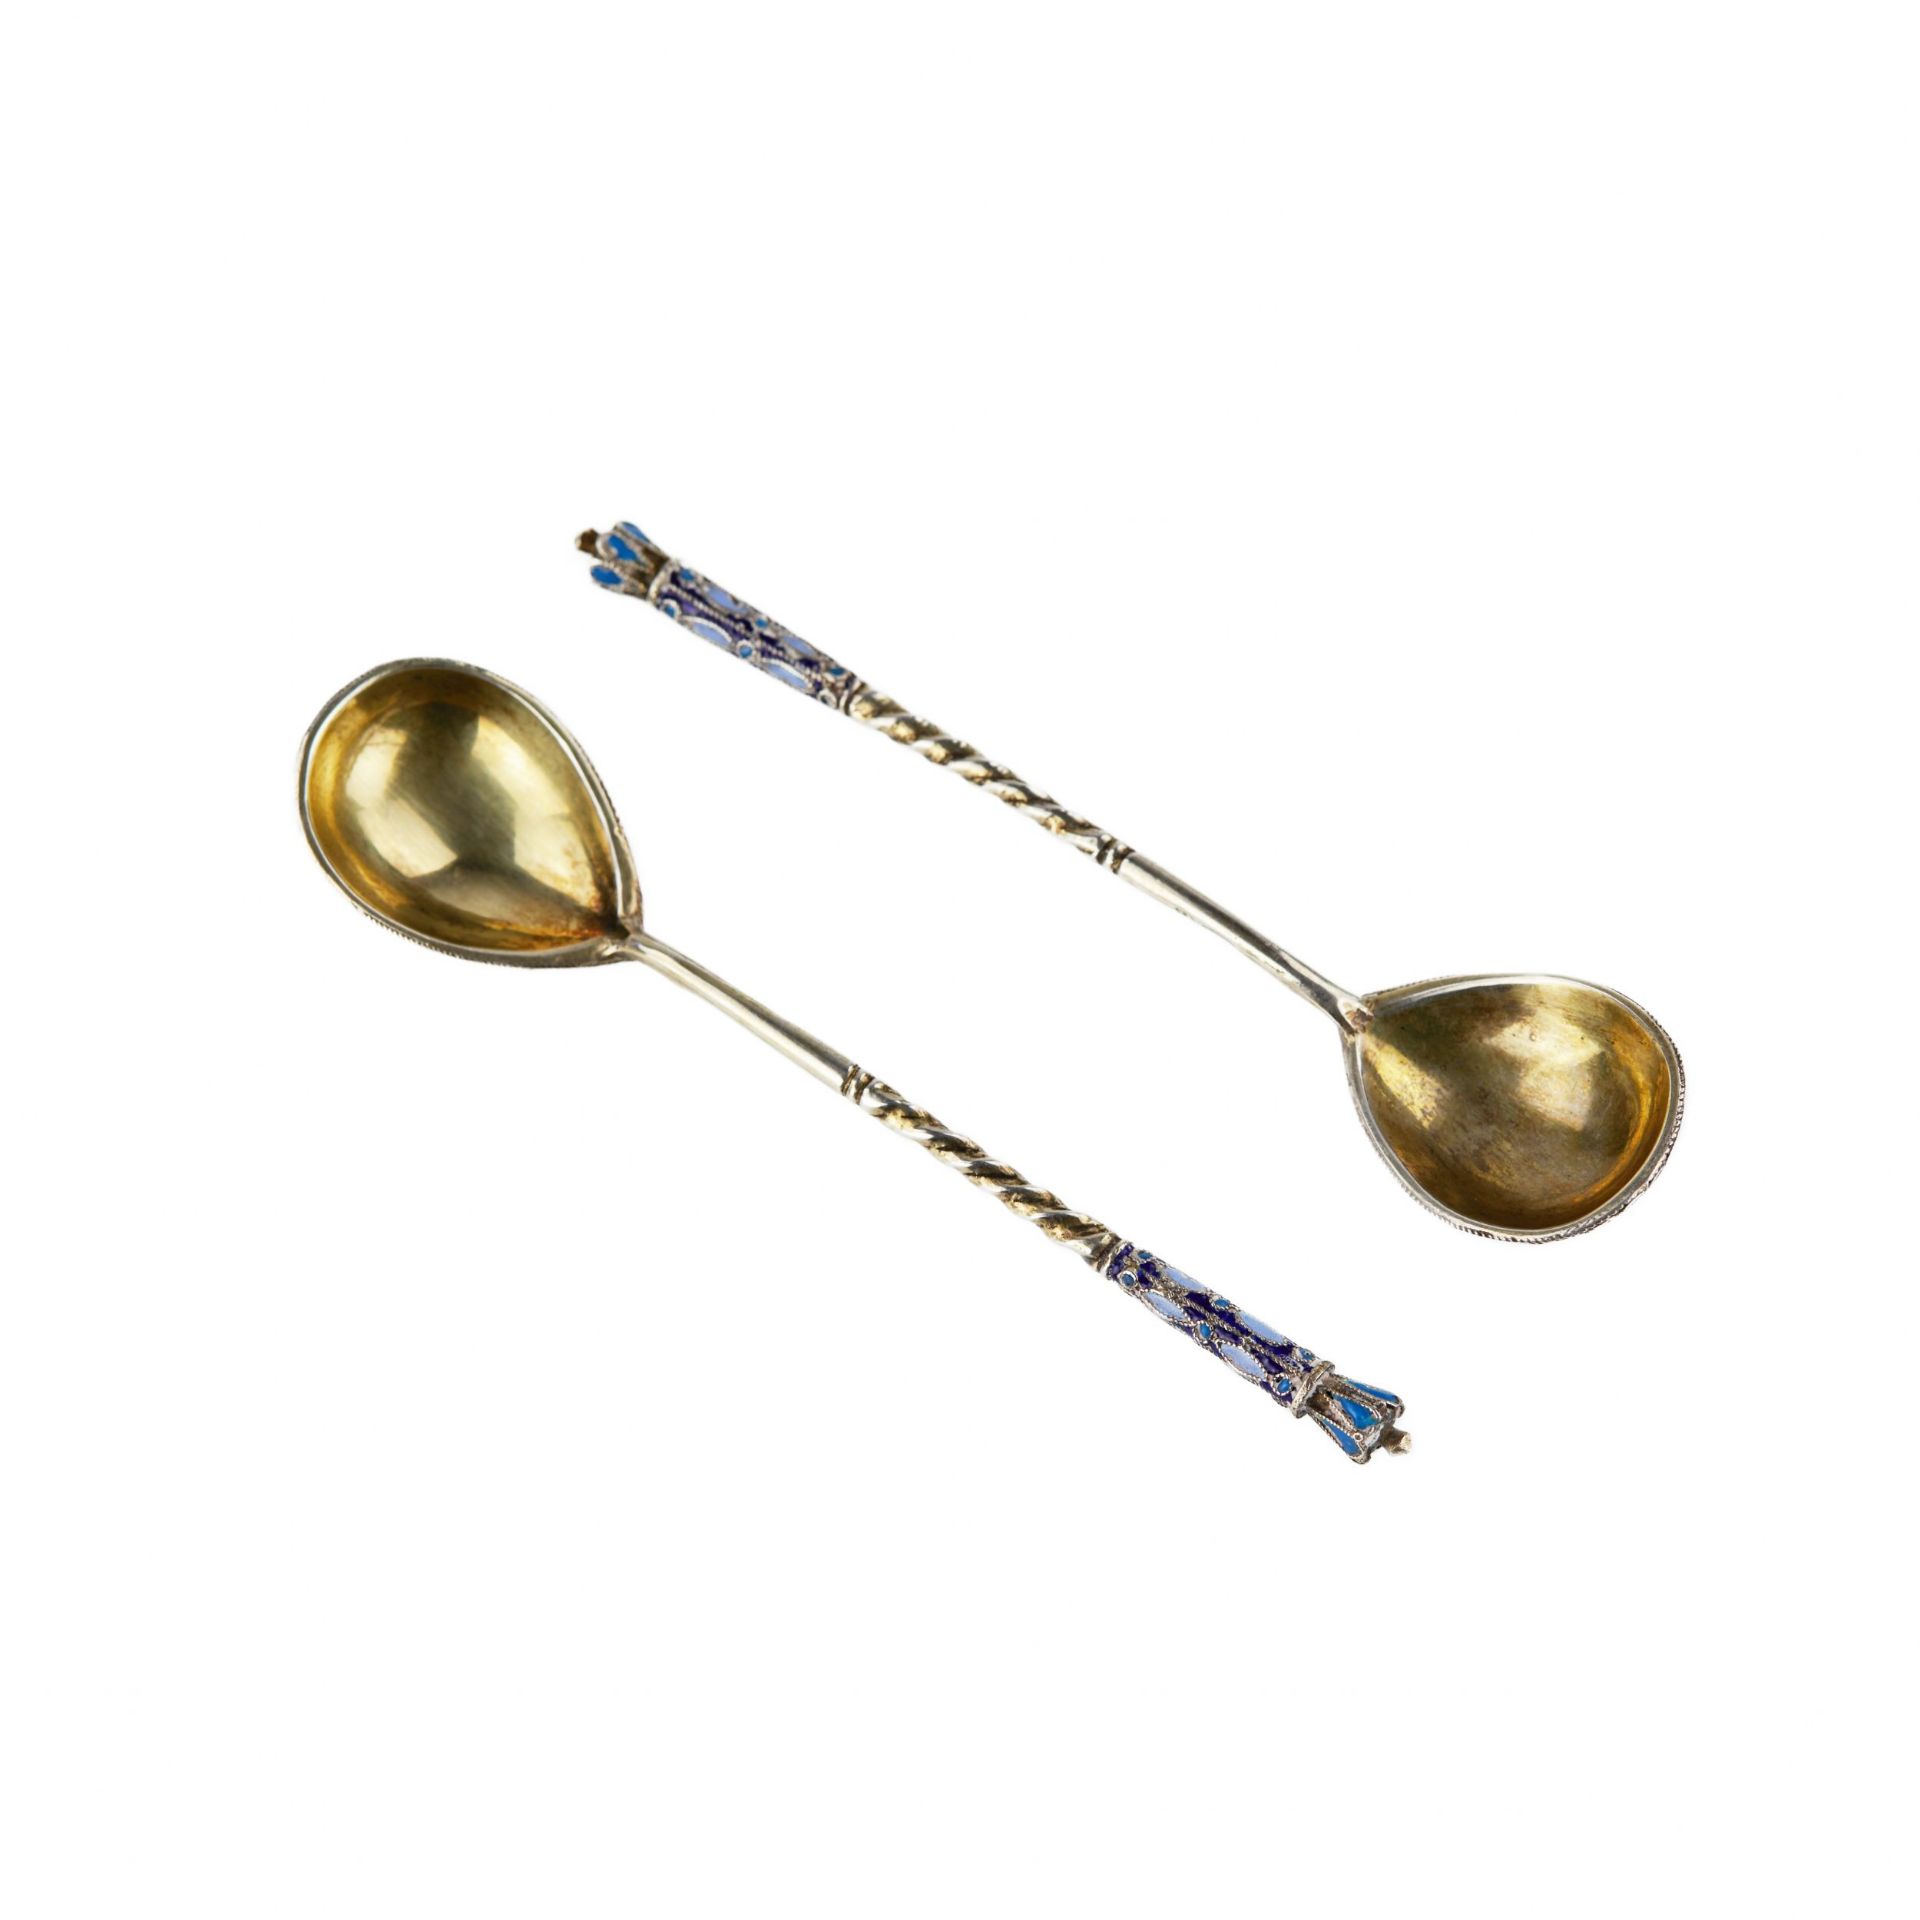 A pair of Russian silver spoons with enamel and gilding. The turn of the 19th-20th centuries. - Image 3 of 5